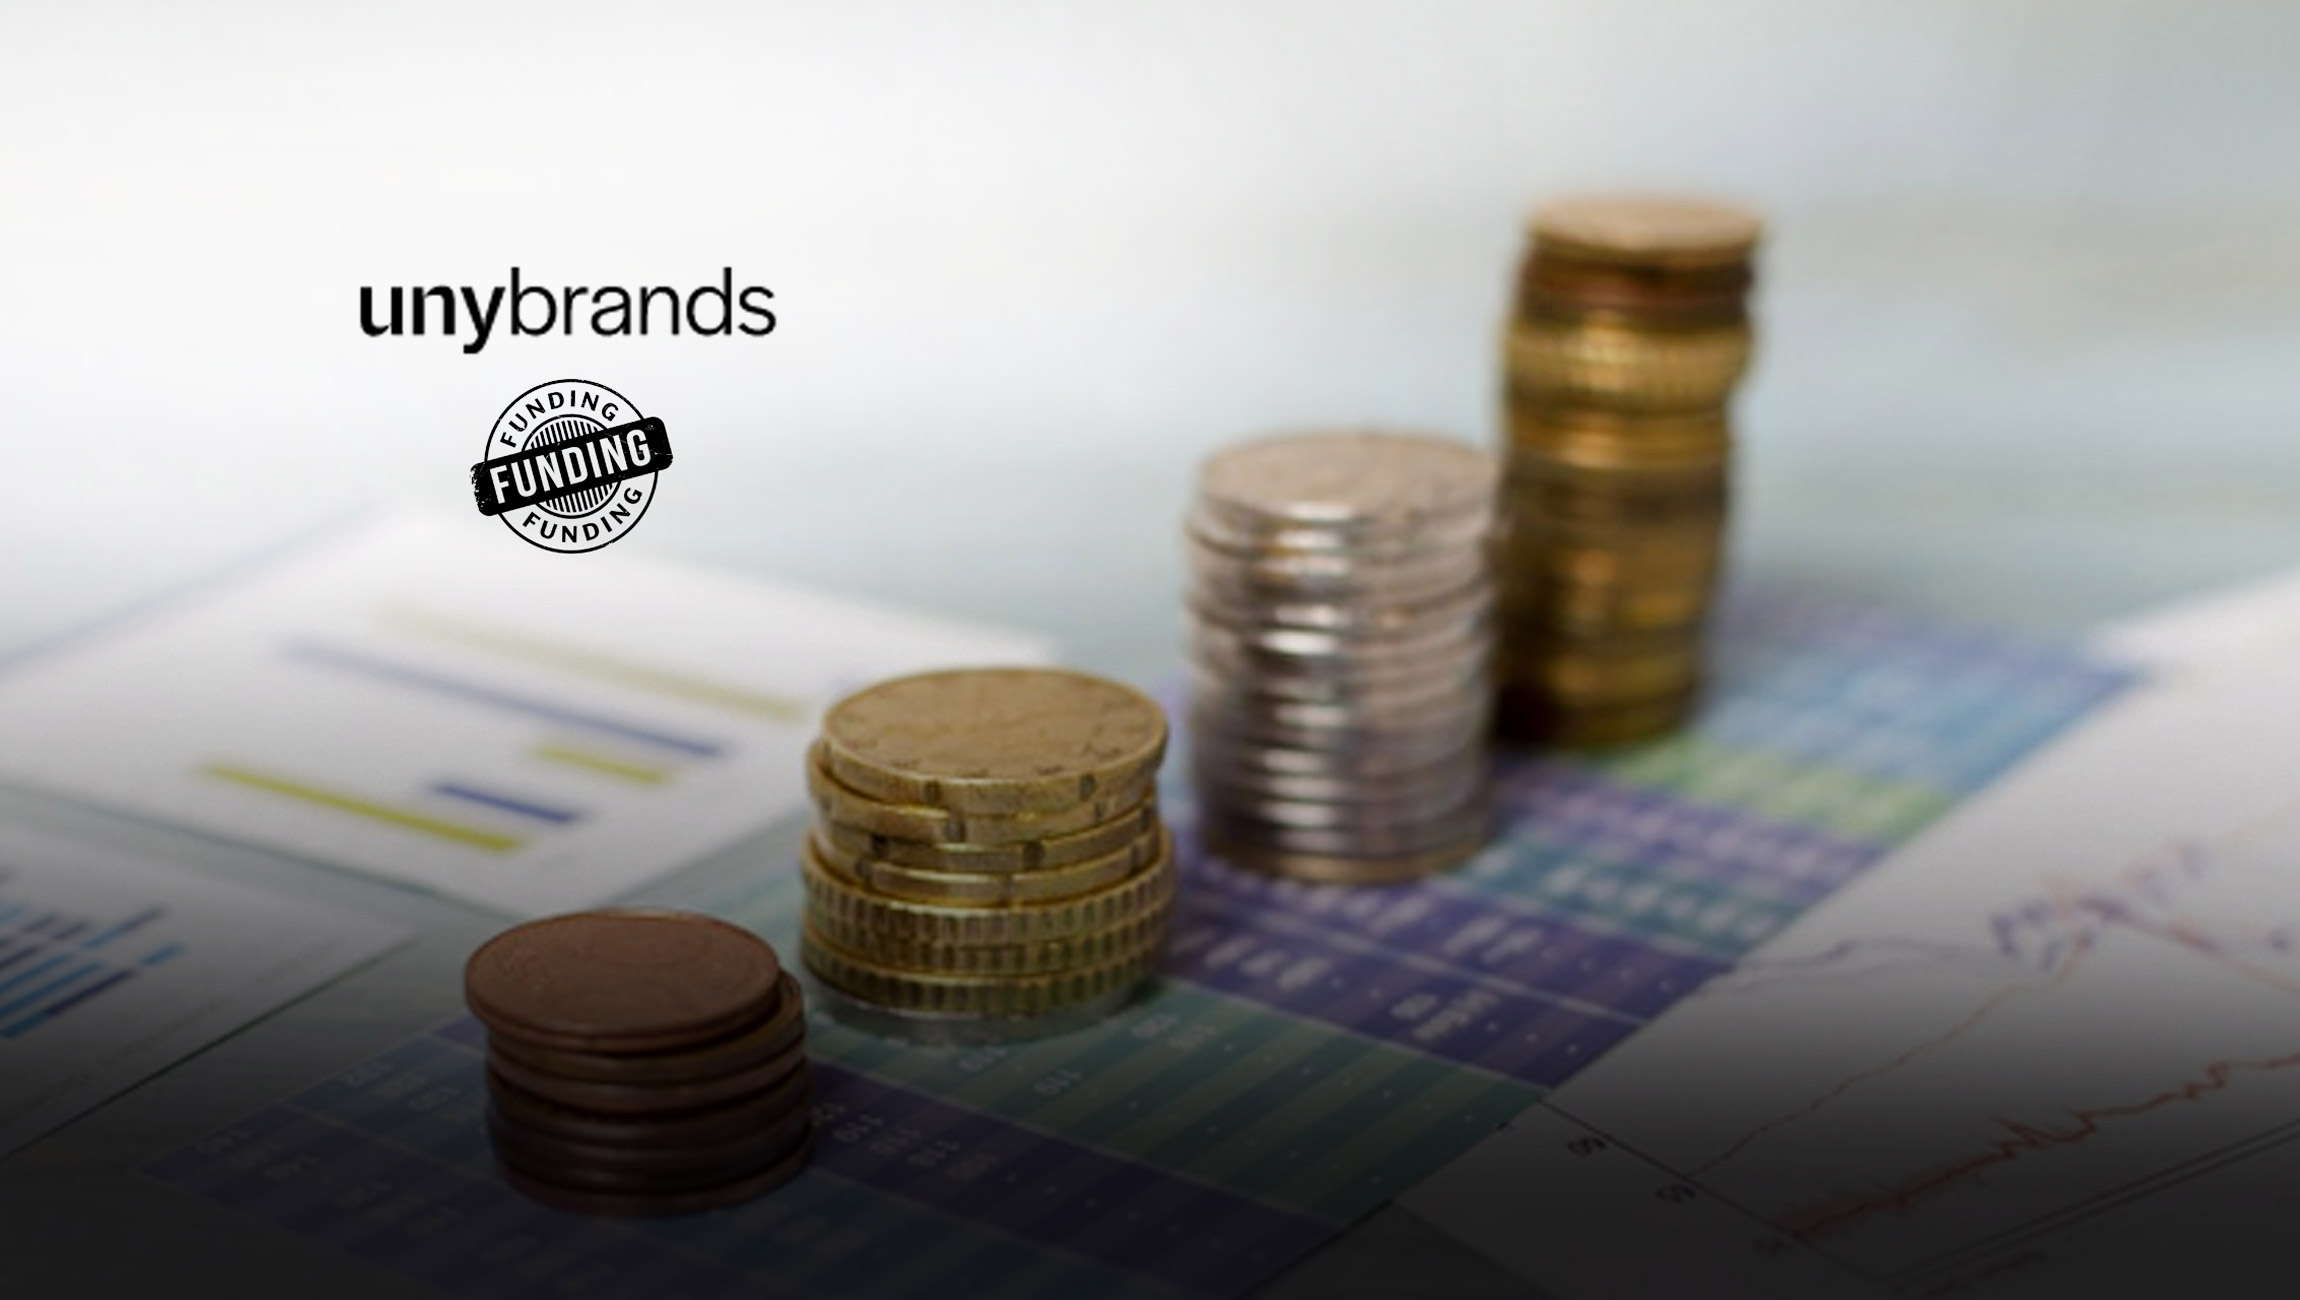 unybrands Closes Large Acquisition in Europe and Completes Its Series B Funding Round